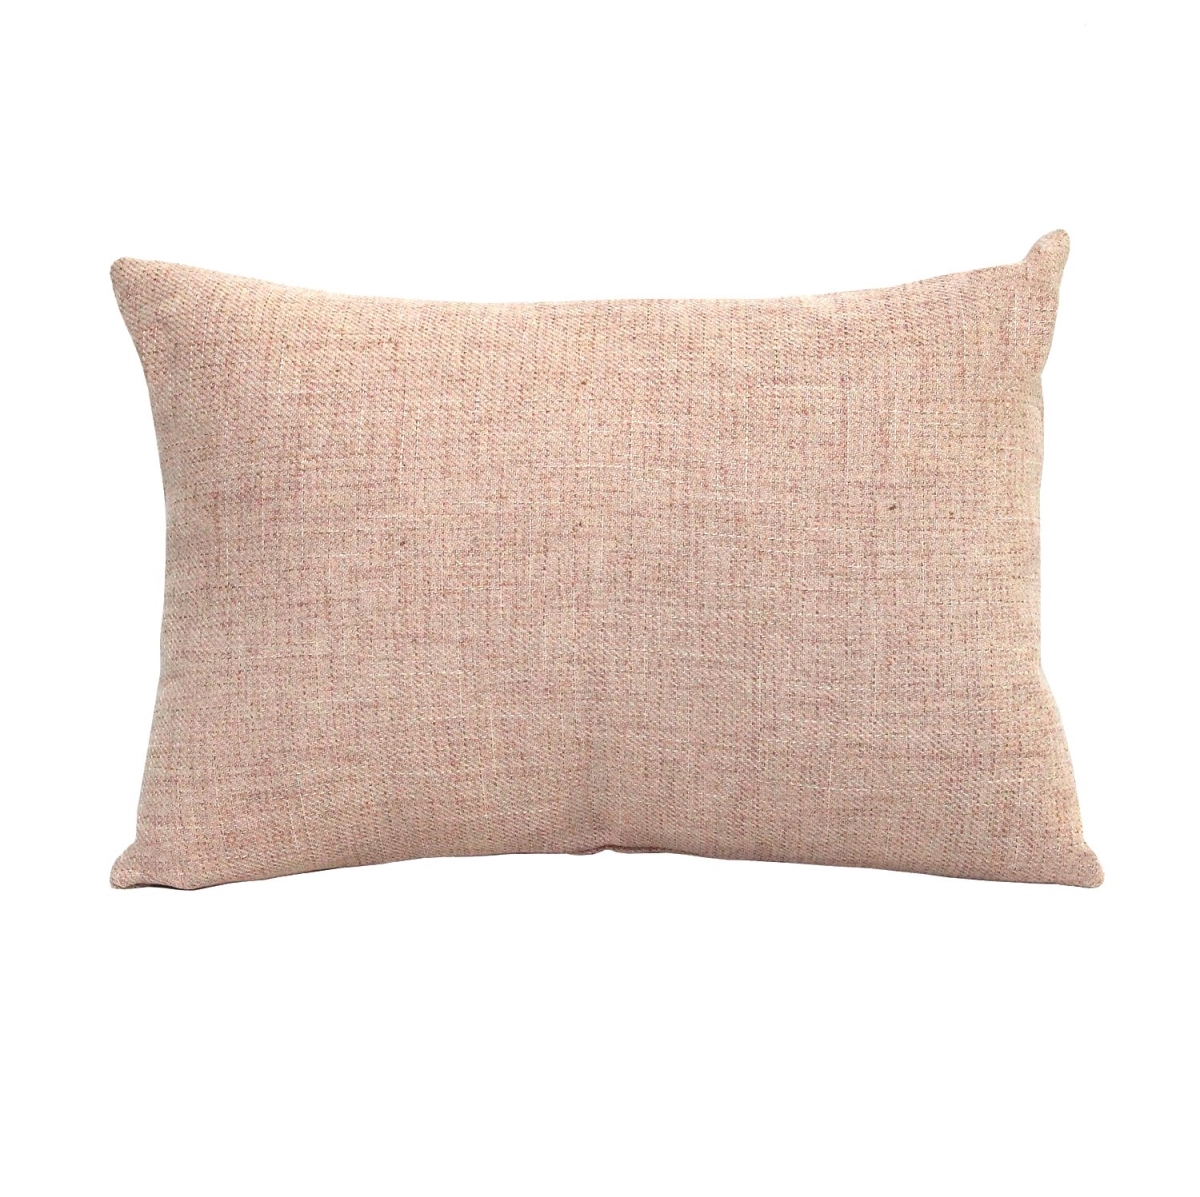 Home Roots Beddings 329327 Stylish Tweed Lumbar Pillow, Pink